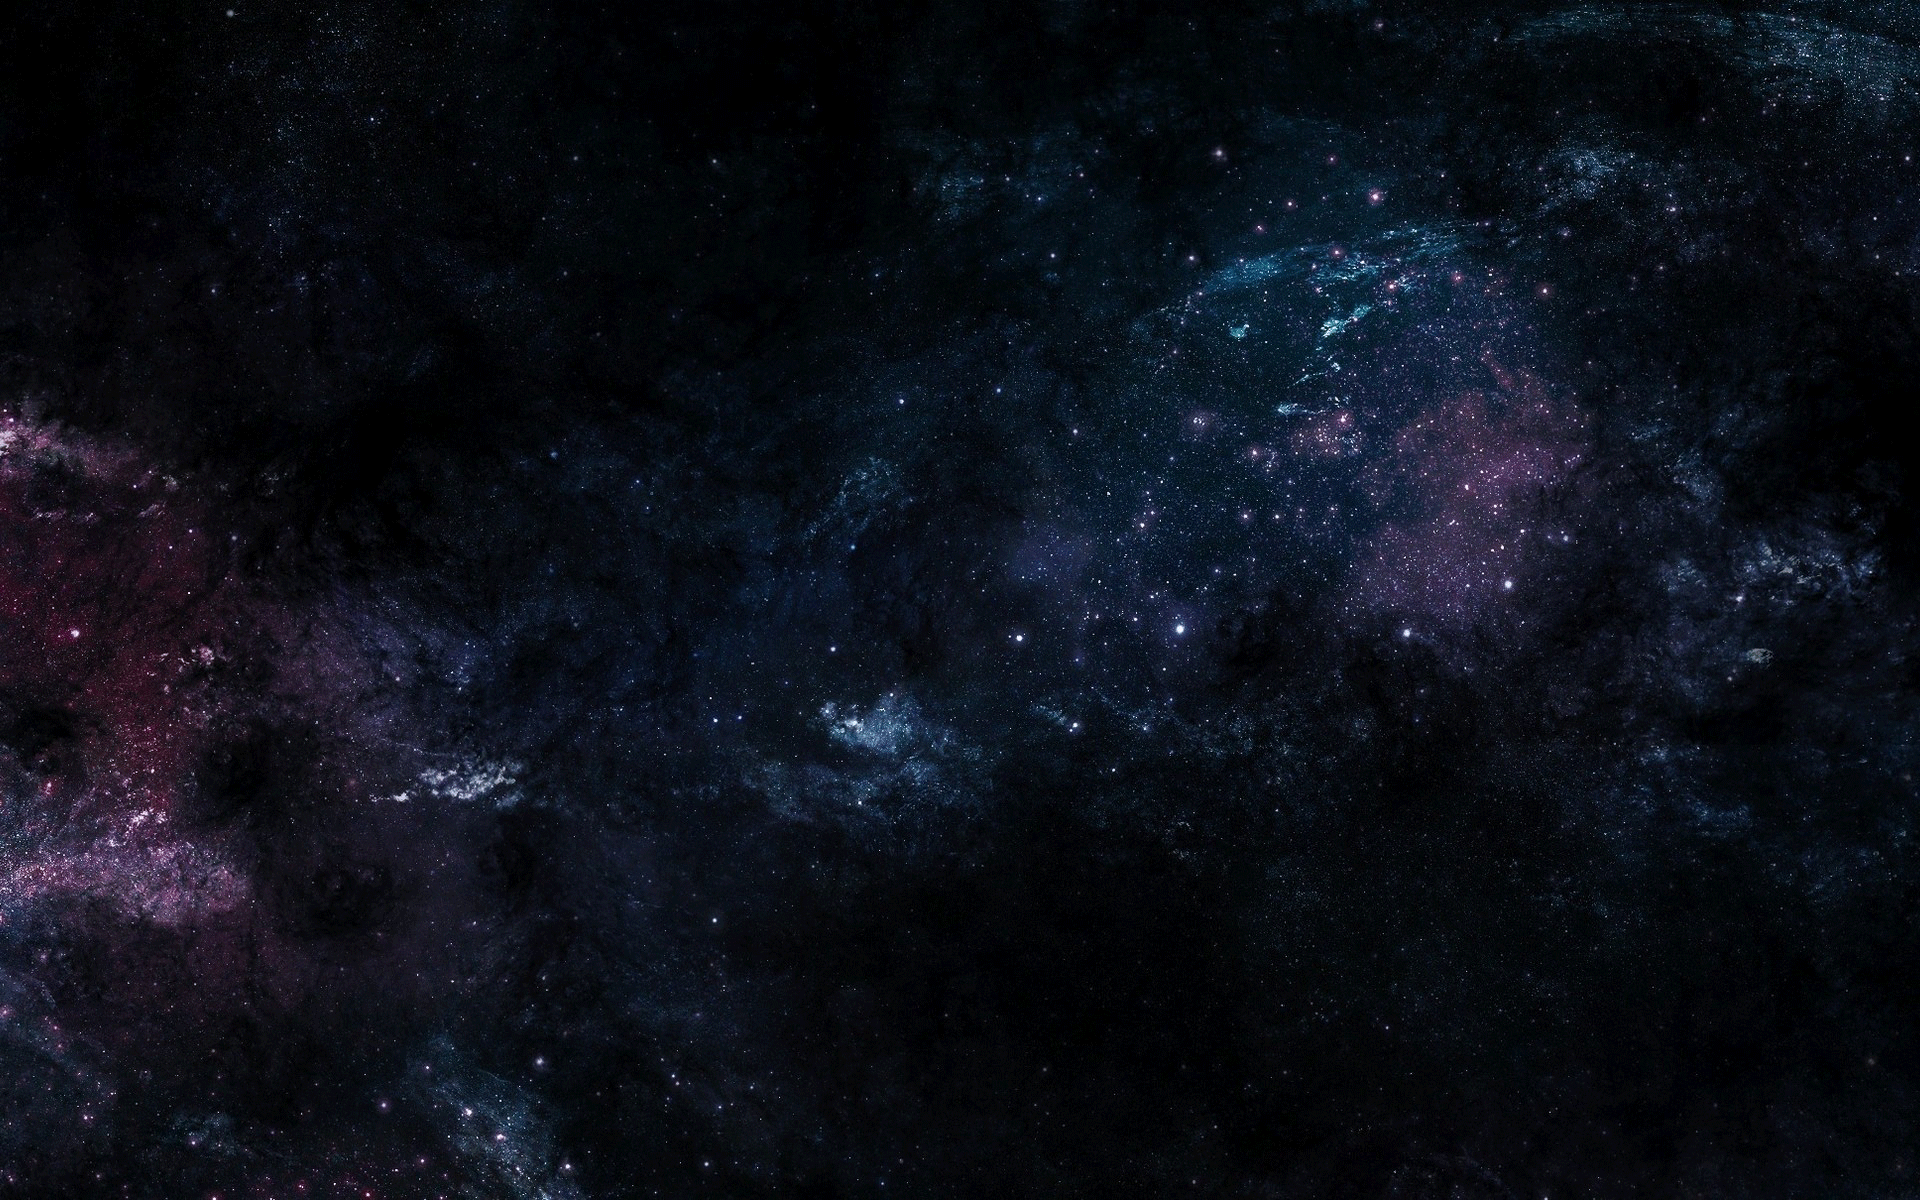 Galaxy Gif Background For Powerpoint